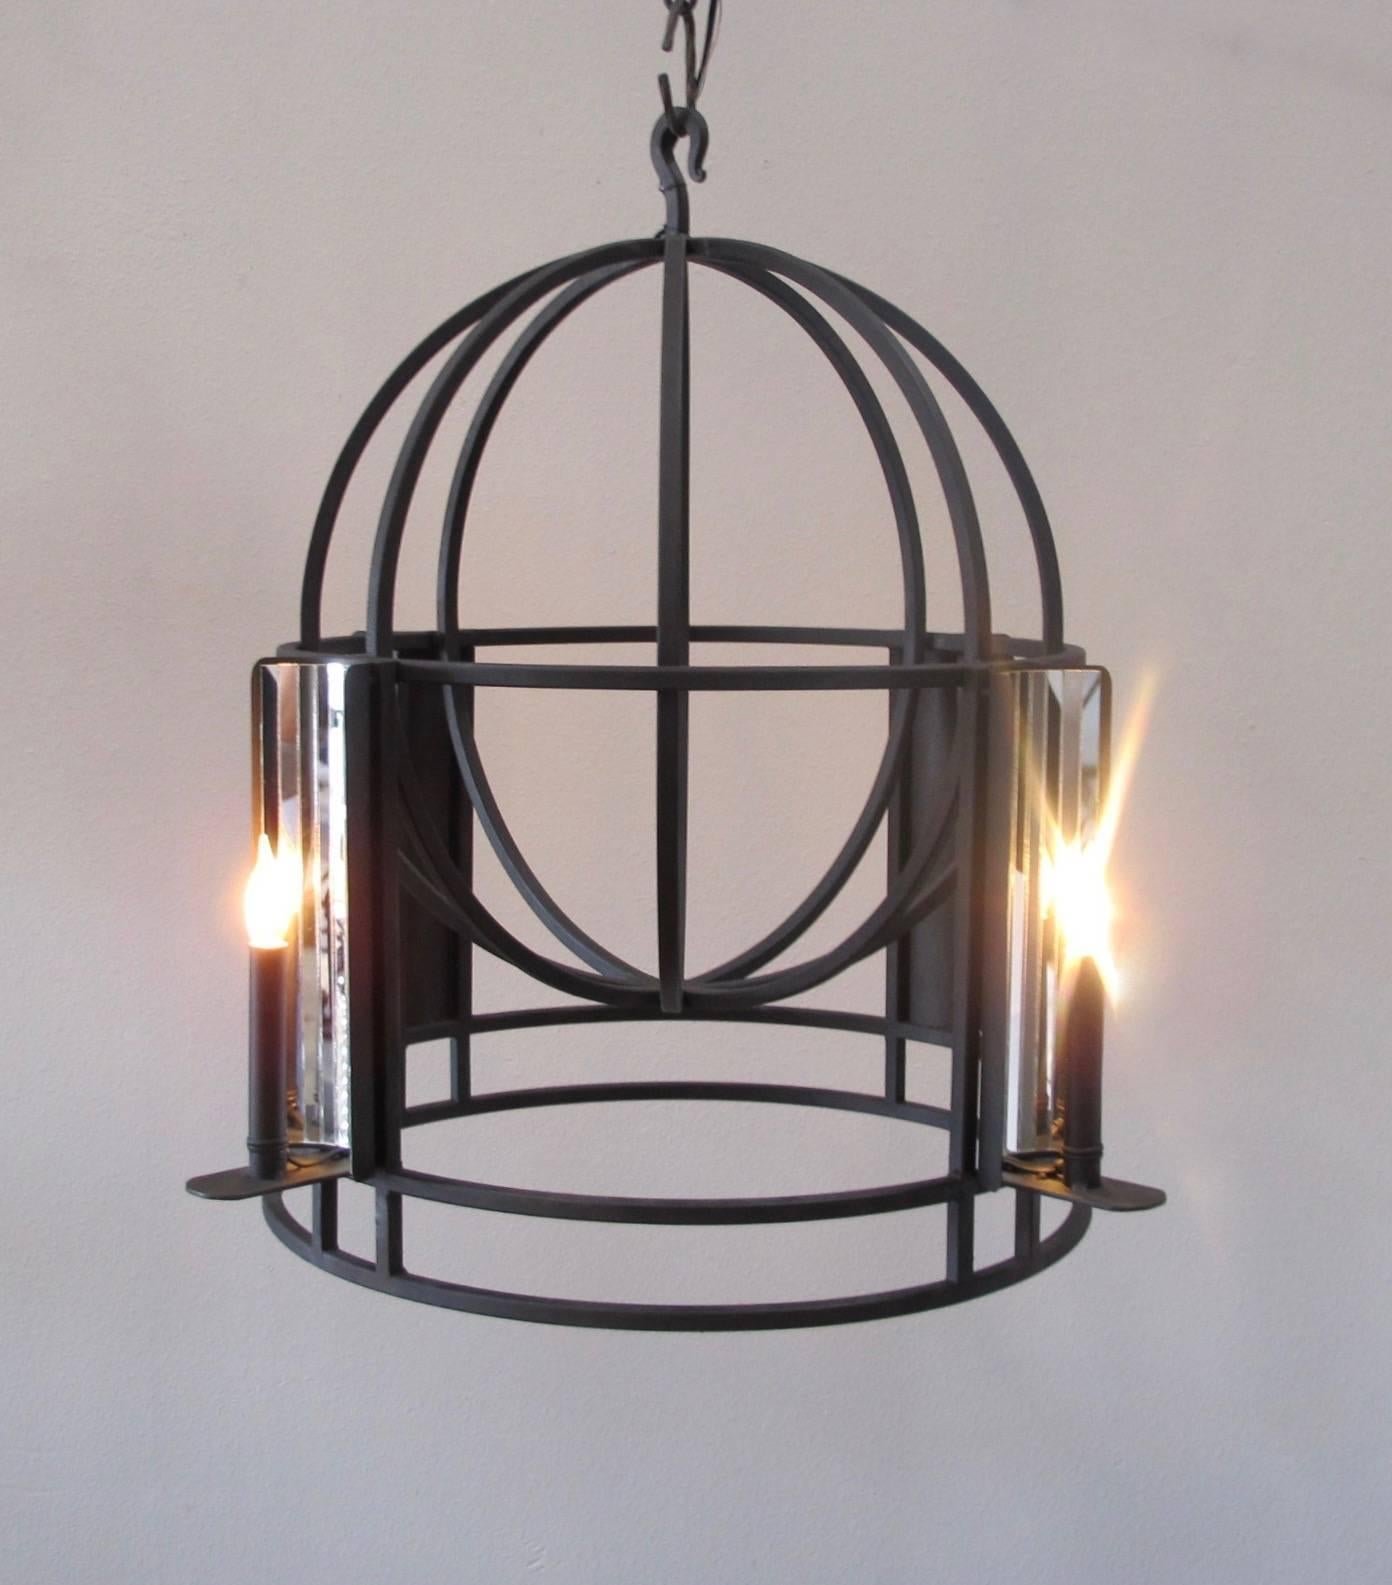 Custom iron chandelier with hand cut mirrored panels. This chandelier has a hand-painted aged black finish and four candelabra base bulbs. The light reflects beautifully in the mirrored panels and the black finish gives a nice contrast to the